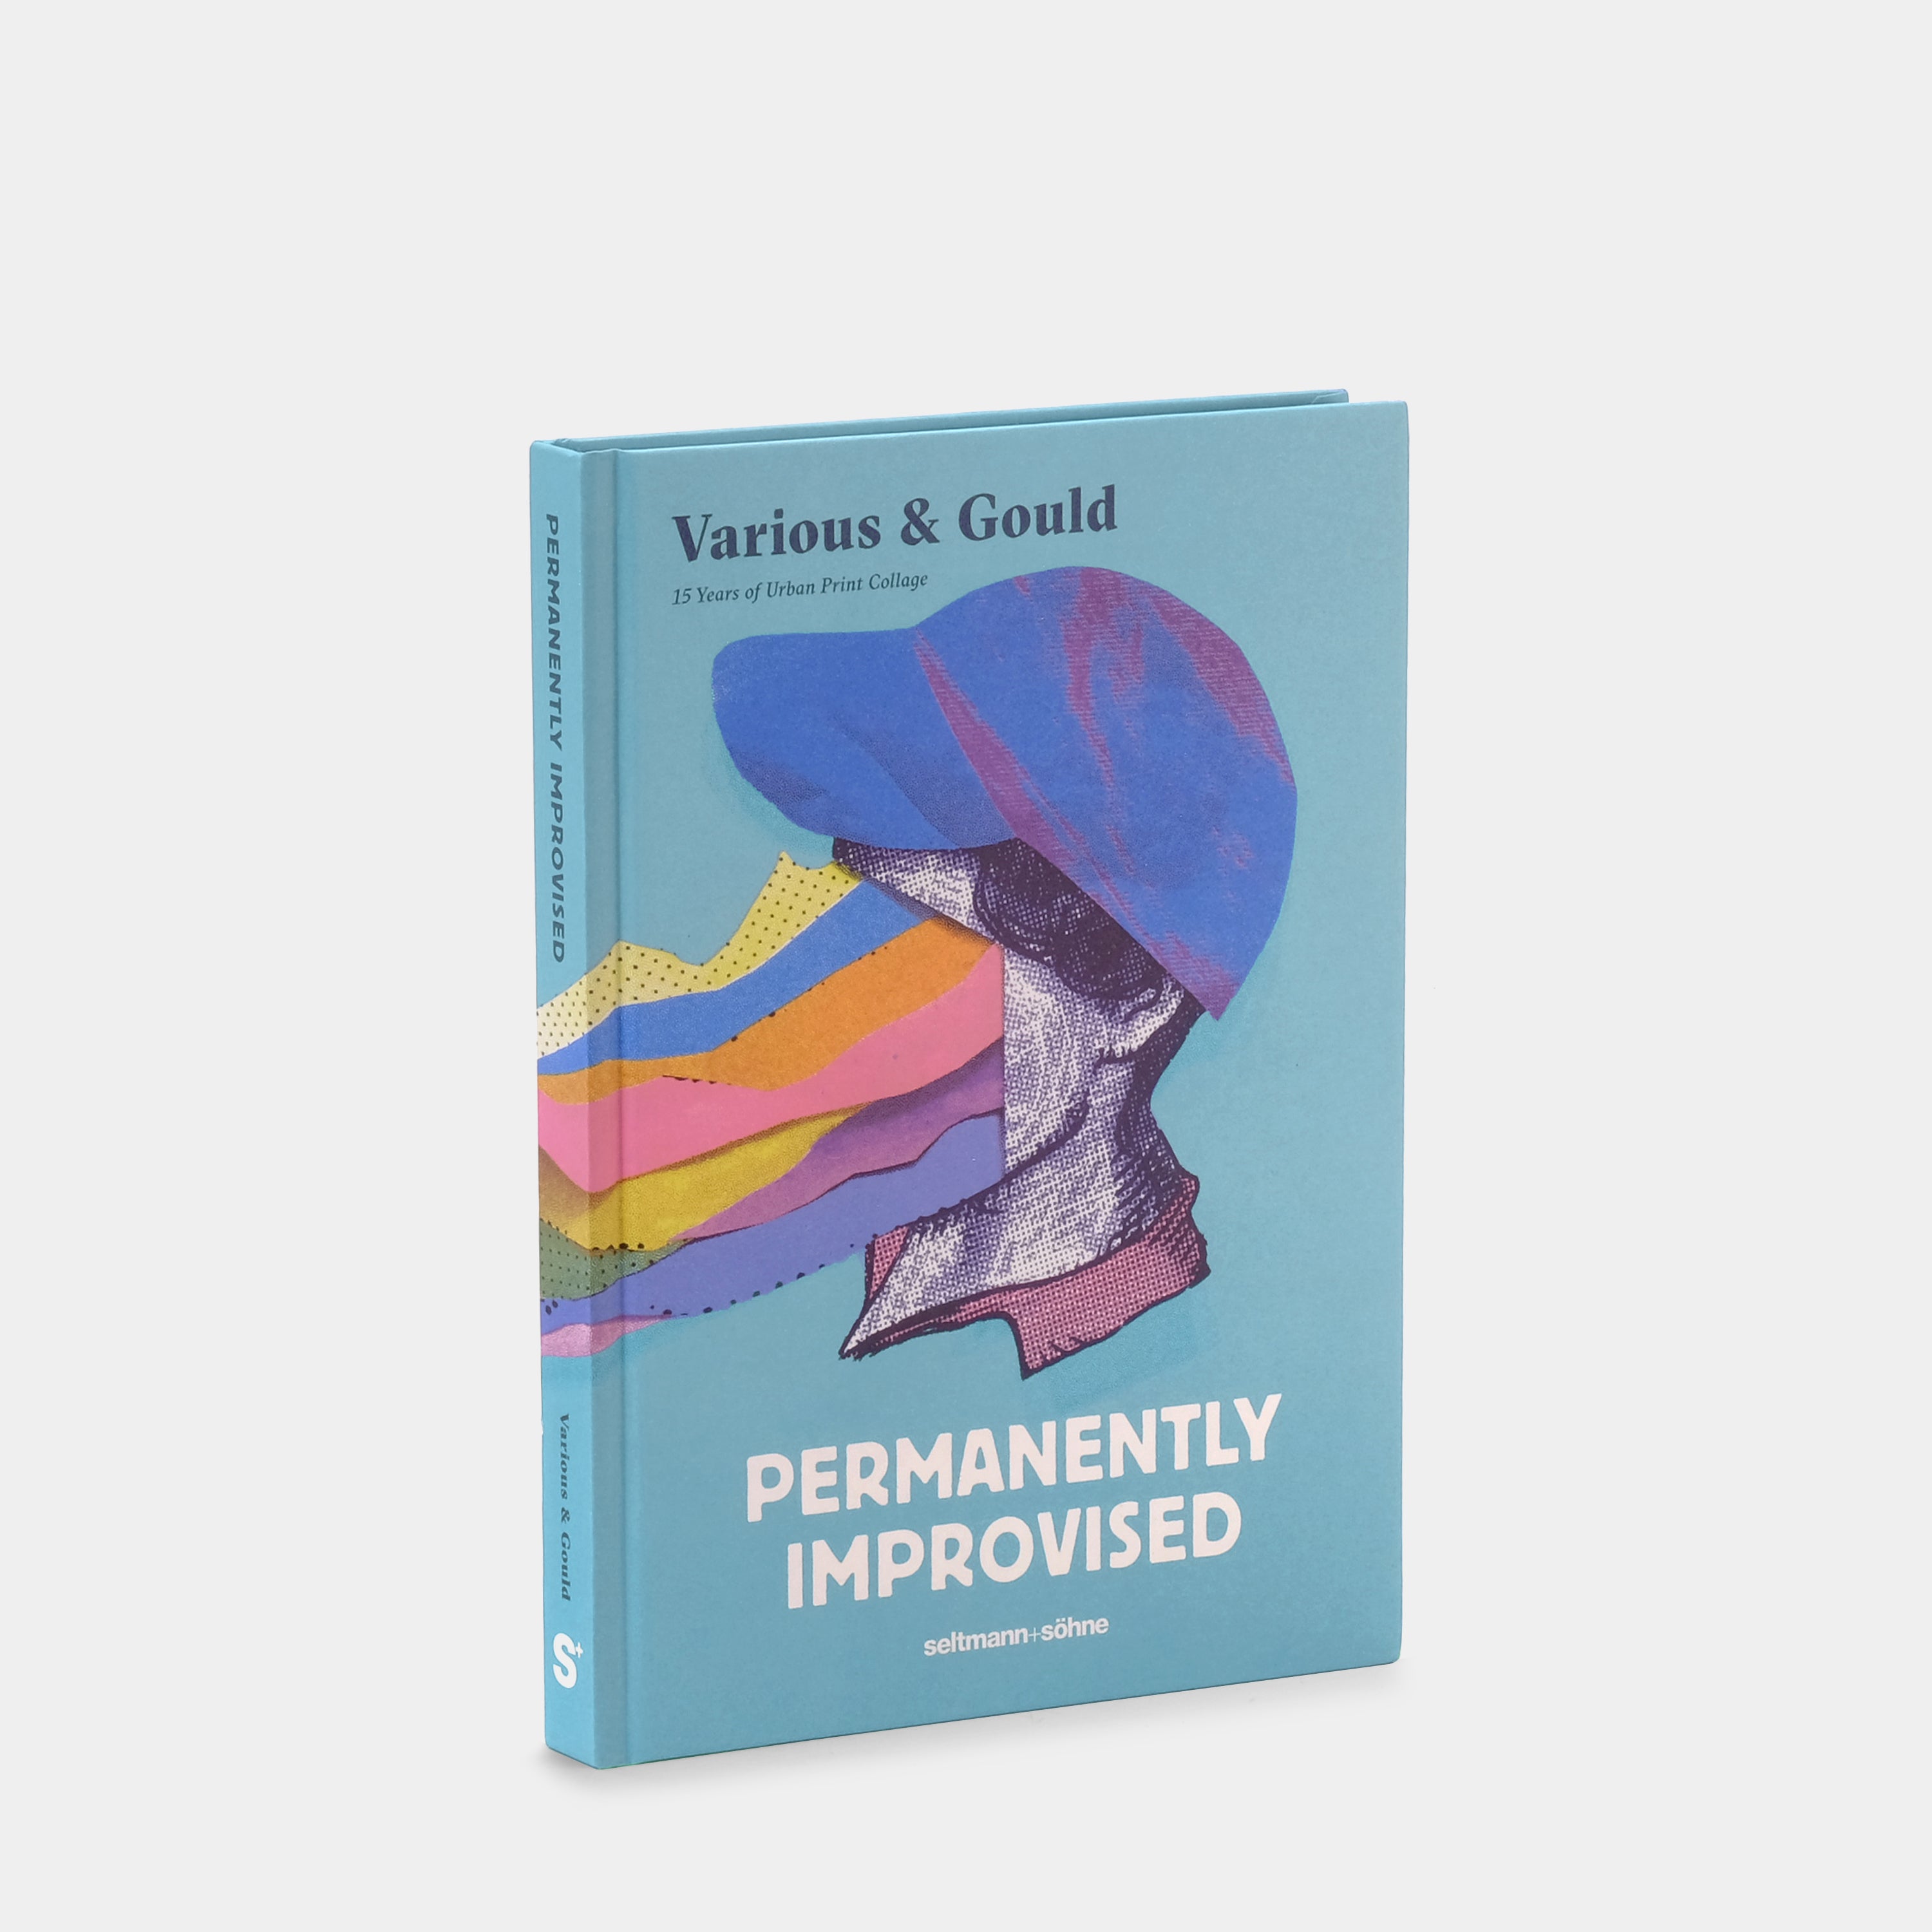 Permanently Improvised: Various & Gould by Seltmann Publishers